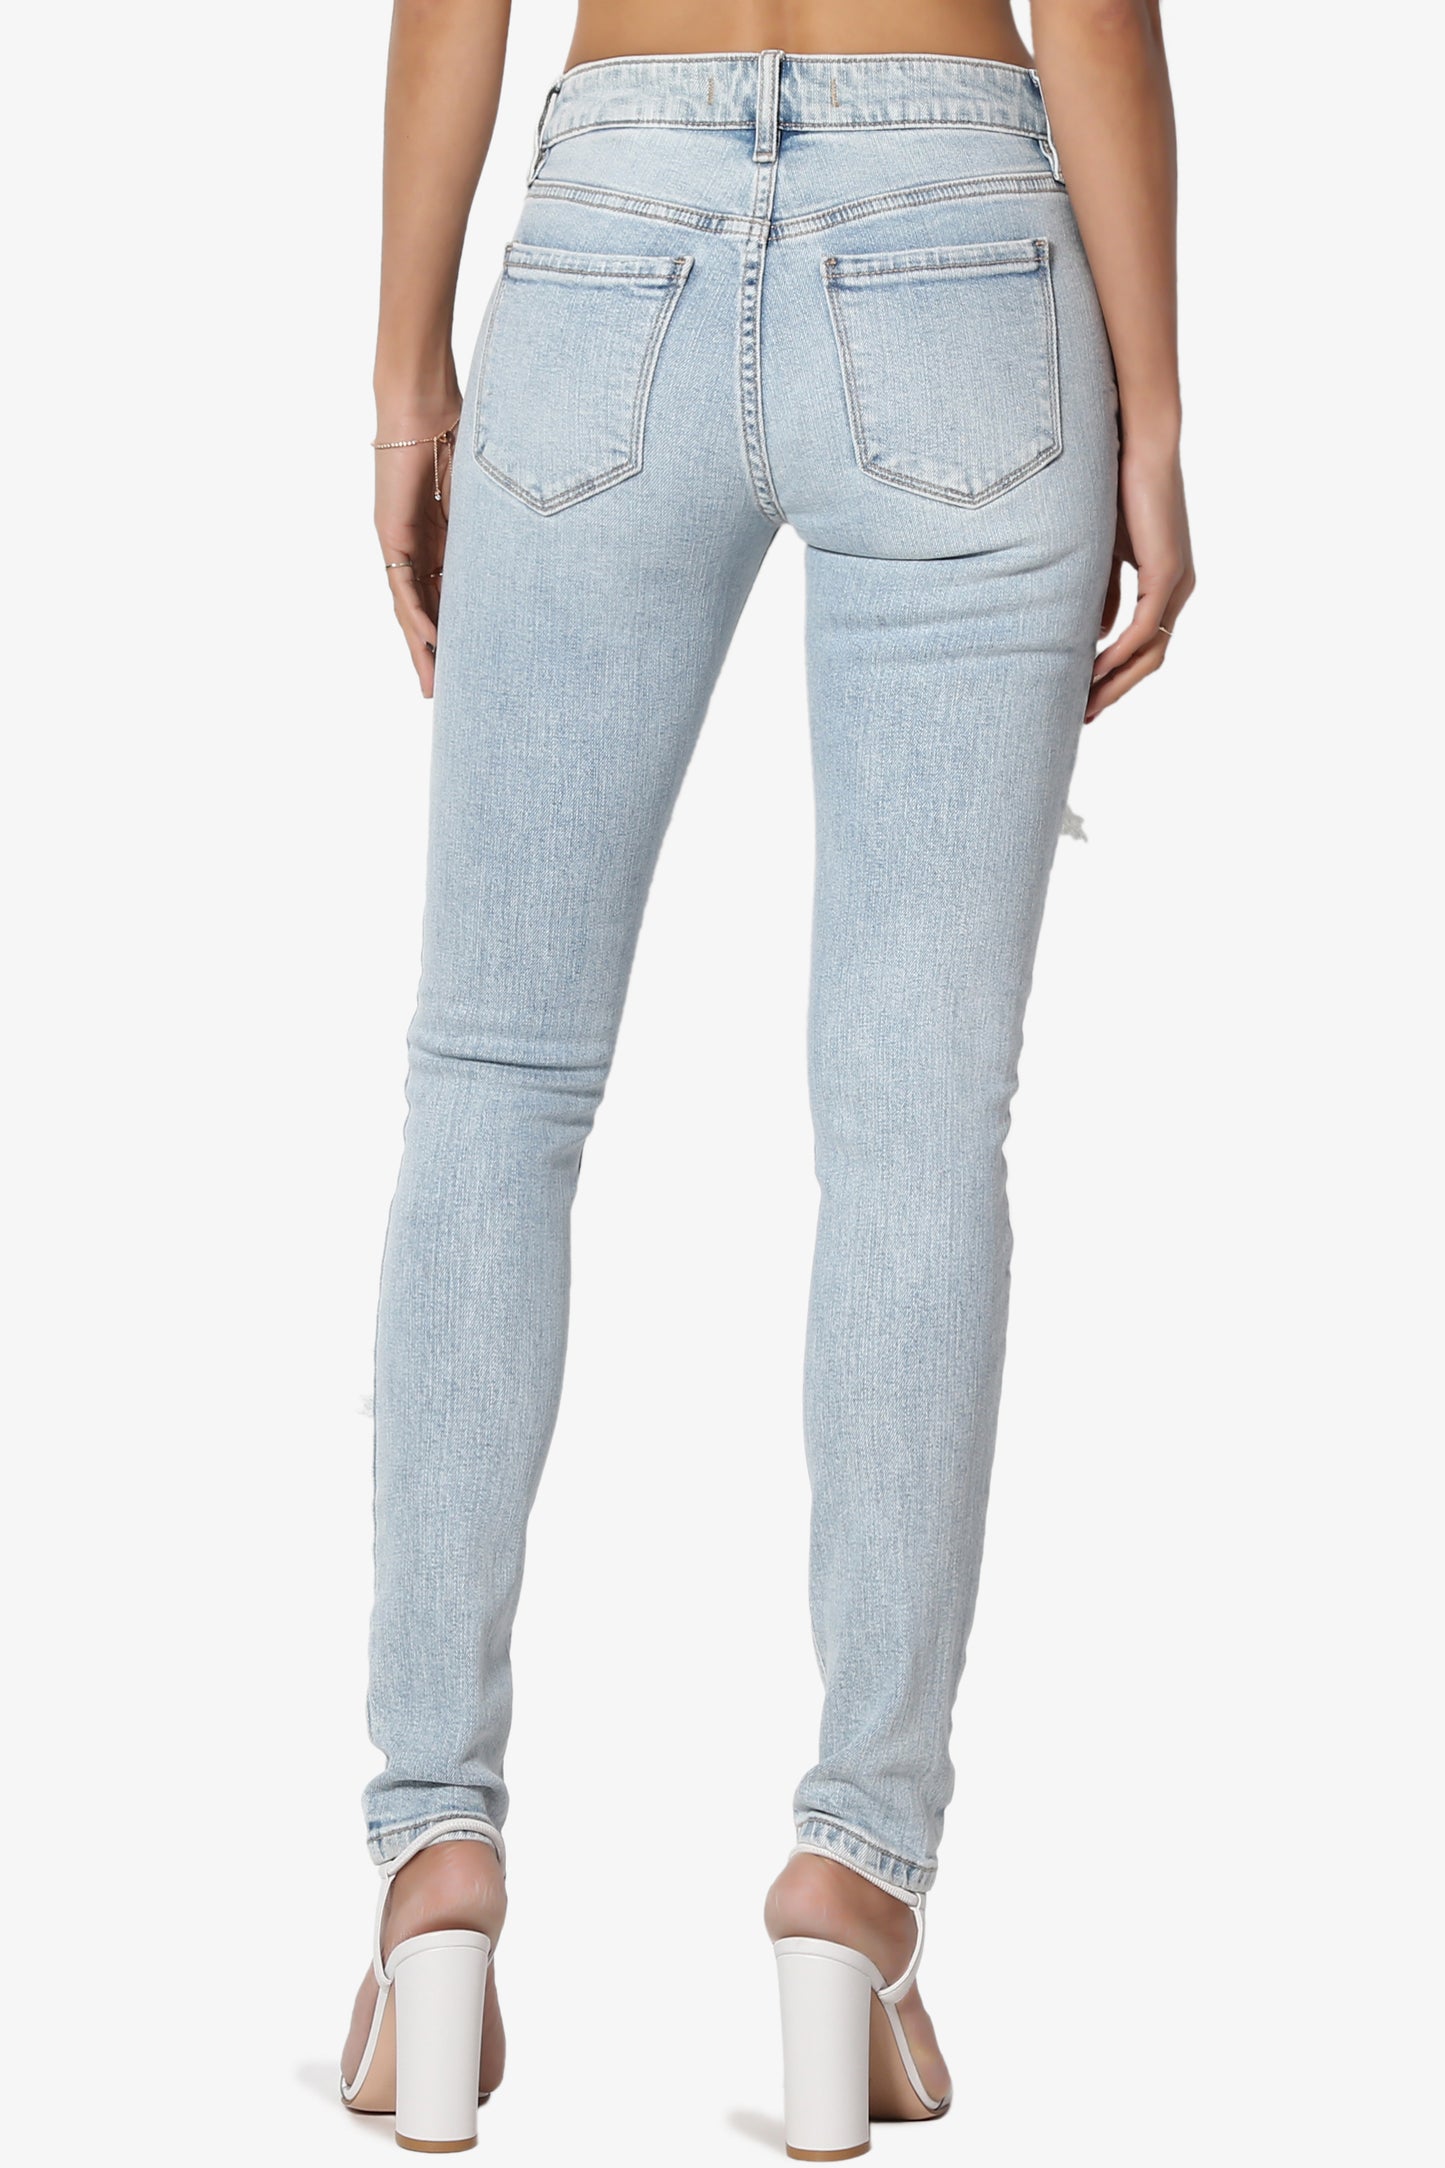 Jude Ripped Mid Rise Ankle Skinny Jeans - TheMogan